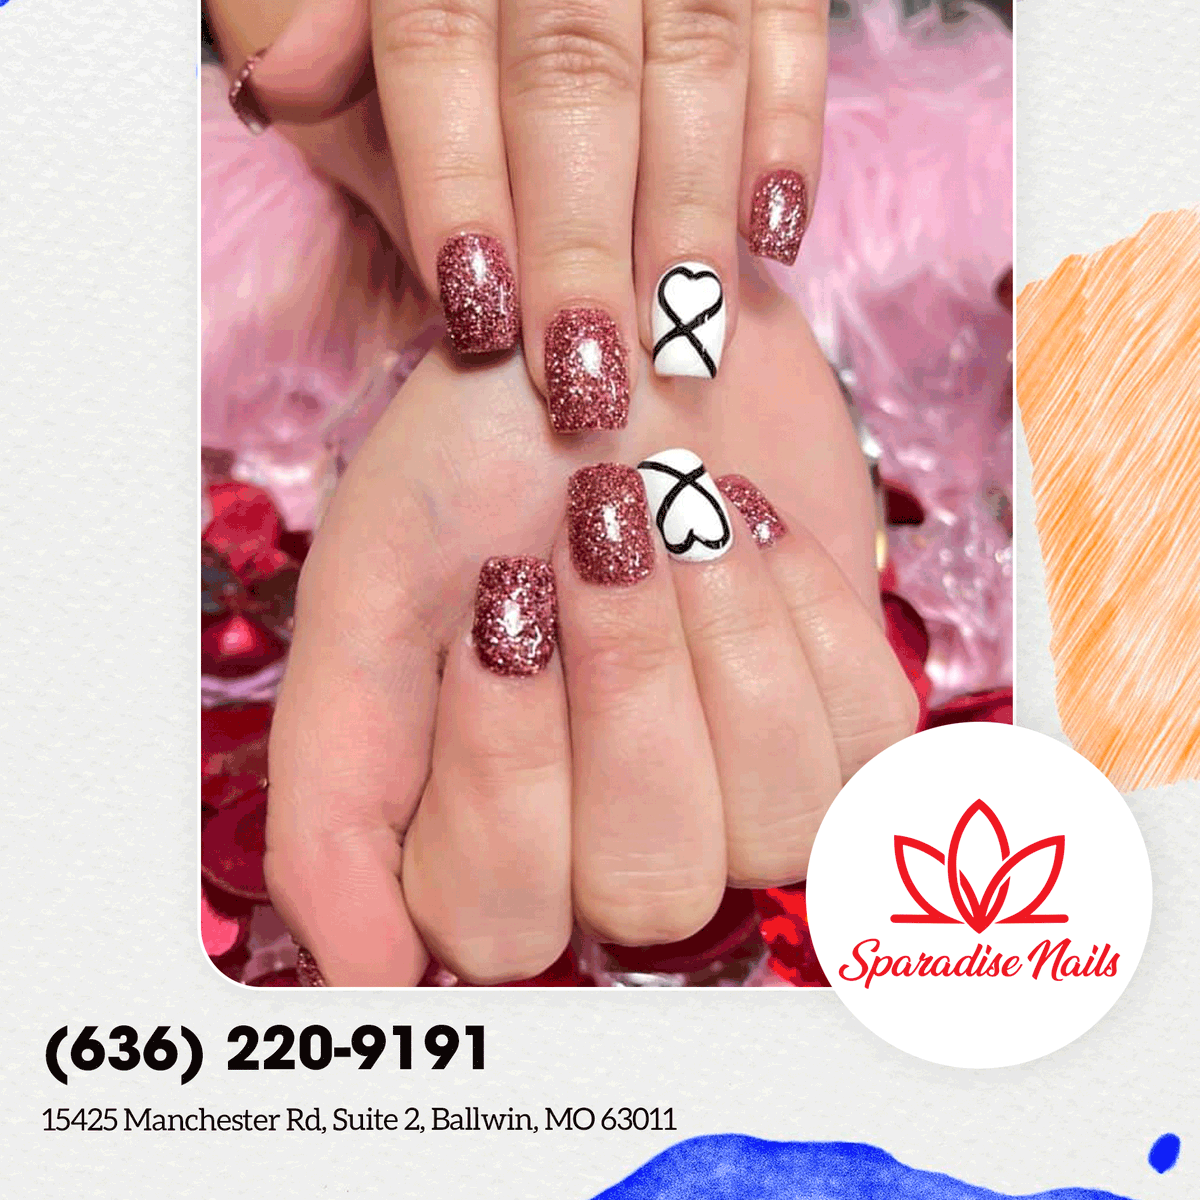 All the glitters with a touch of love! Loving these sparkle nails with heart accents.💖🪞

*Booking Online: lk.macmarketing.us/SparadiseNails…

#sparadisenails #nailsalon #nails #nailart #nailsalonballwin #naildesign #spa